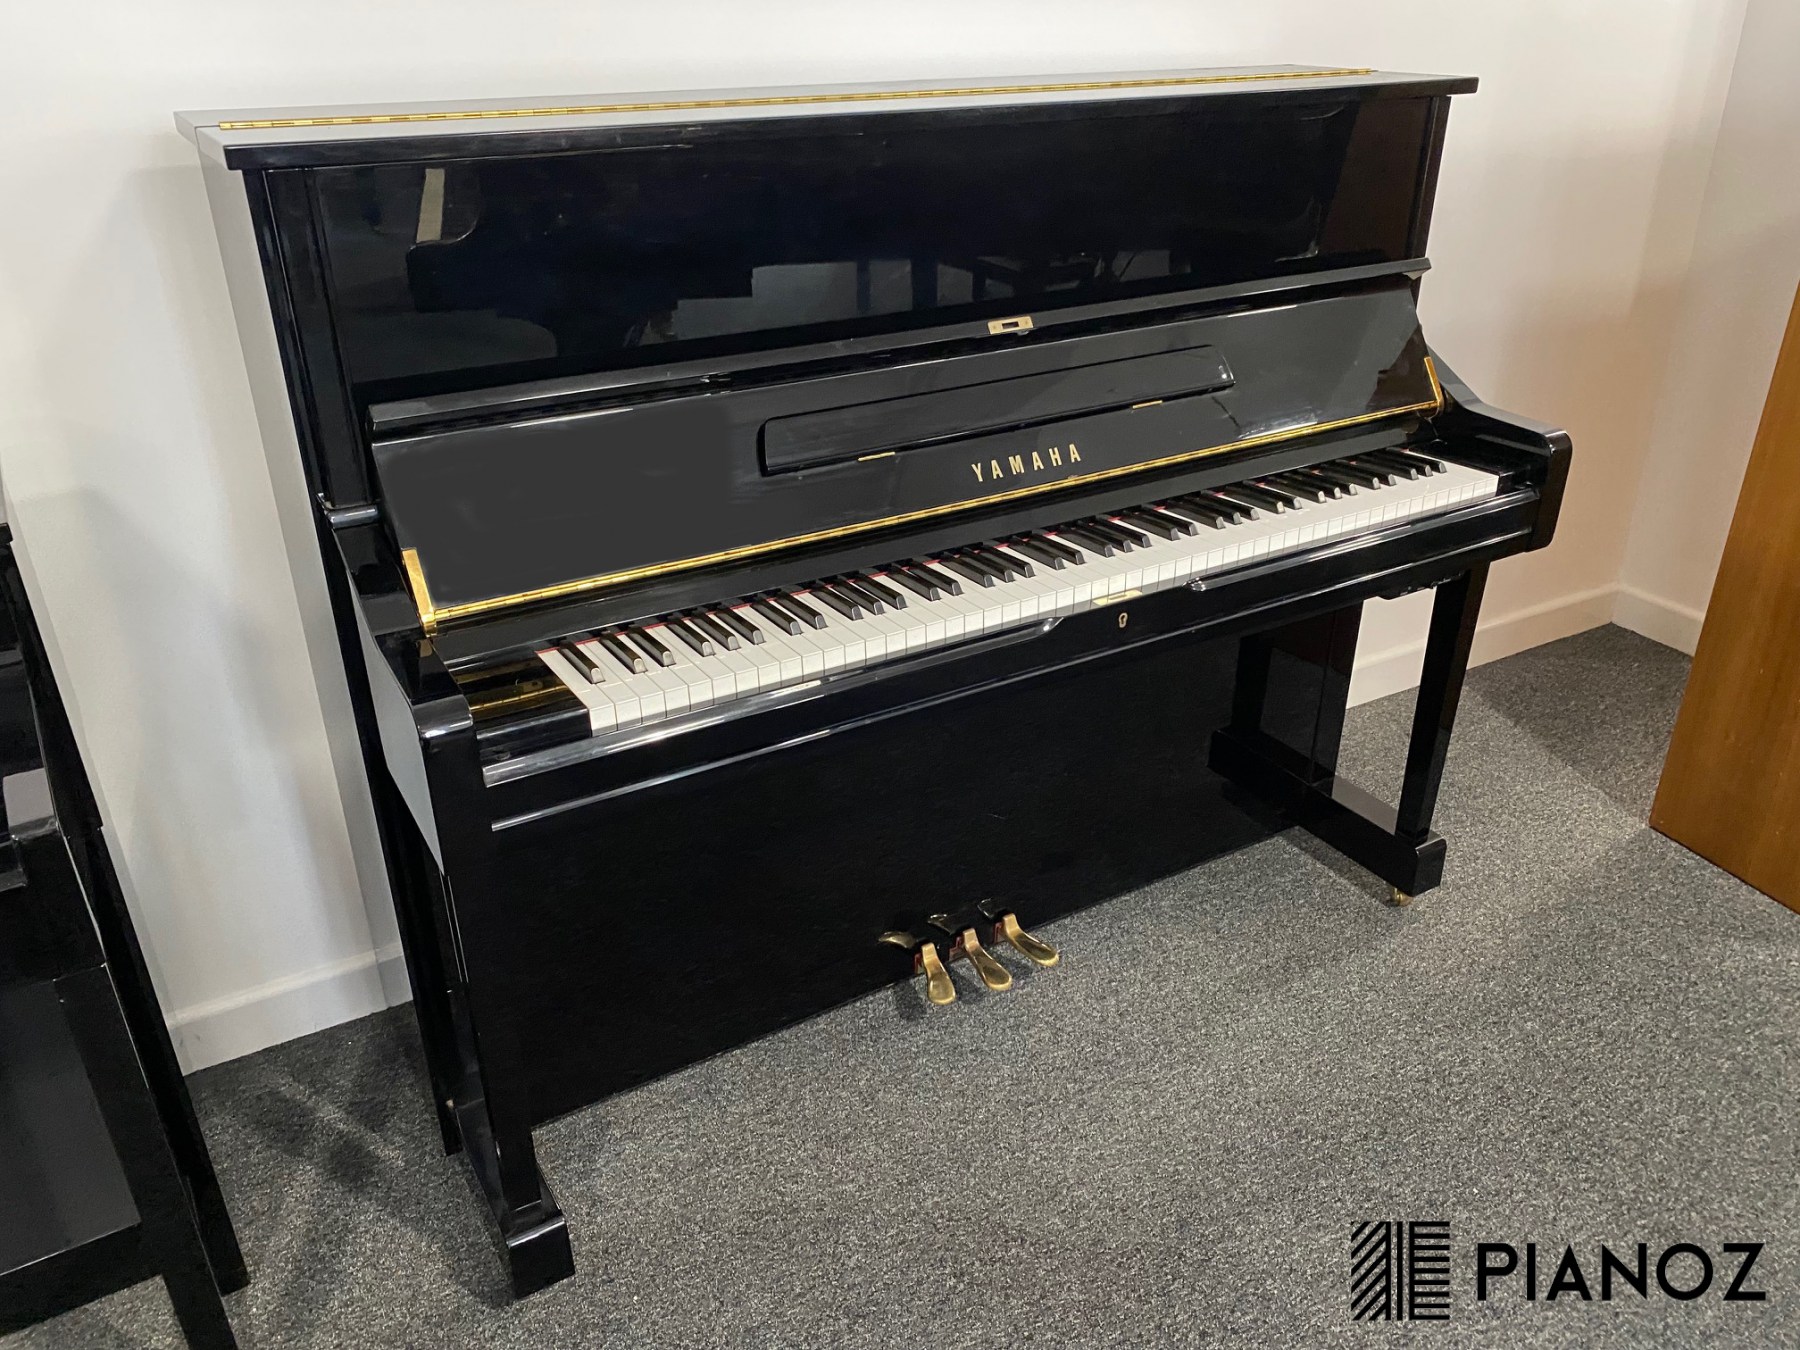 Yamaha U1 Silent Upright Piano piano for sale in UK